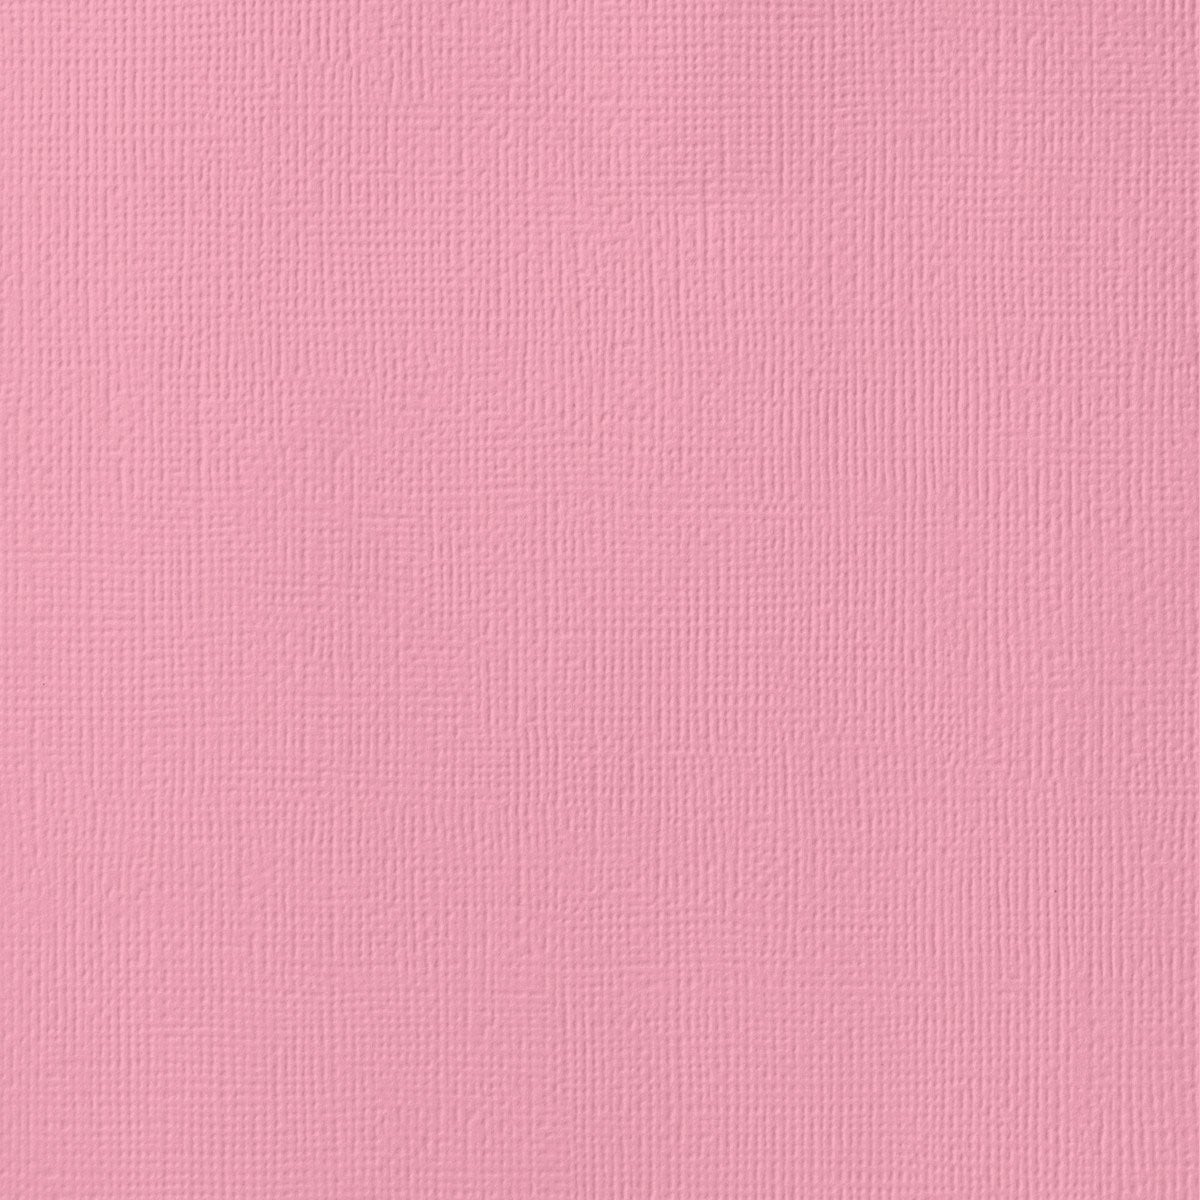 Lux 12 x 12 Cardstock 500/Box, Candy Pink (1212-C-14-500)